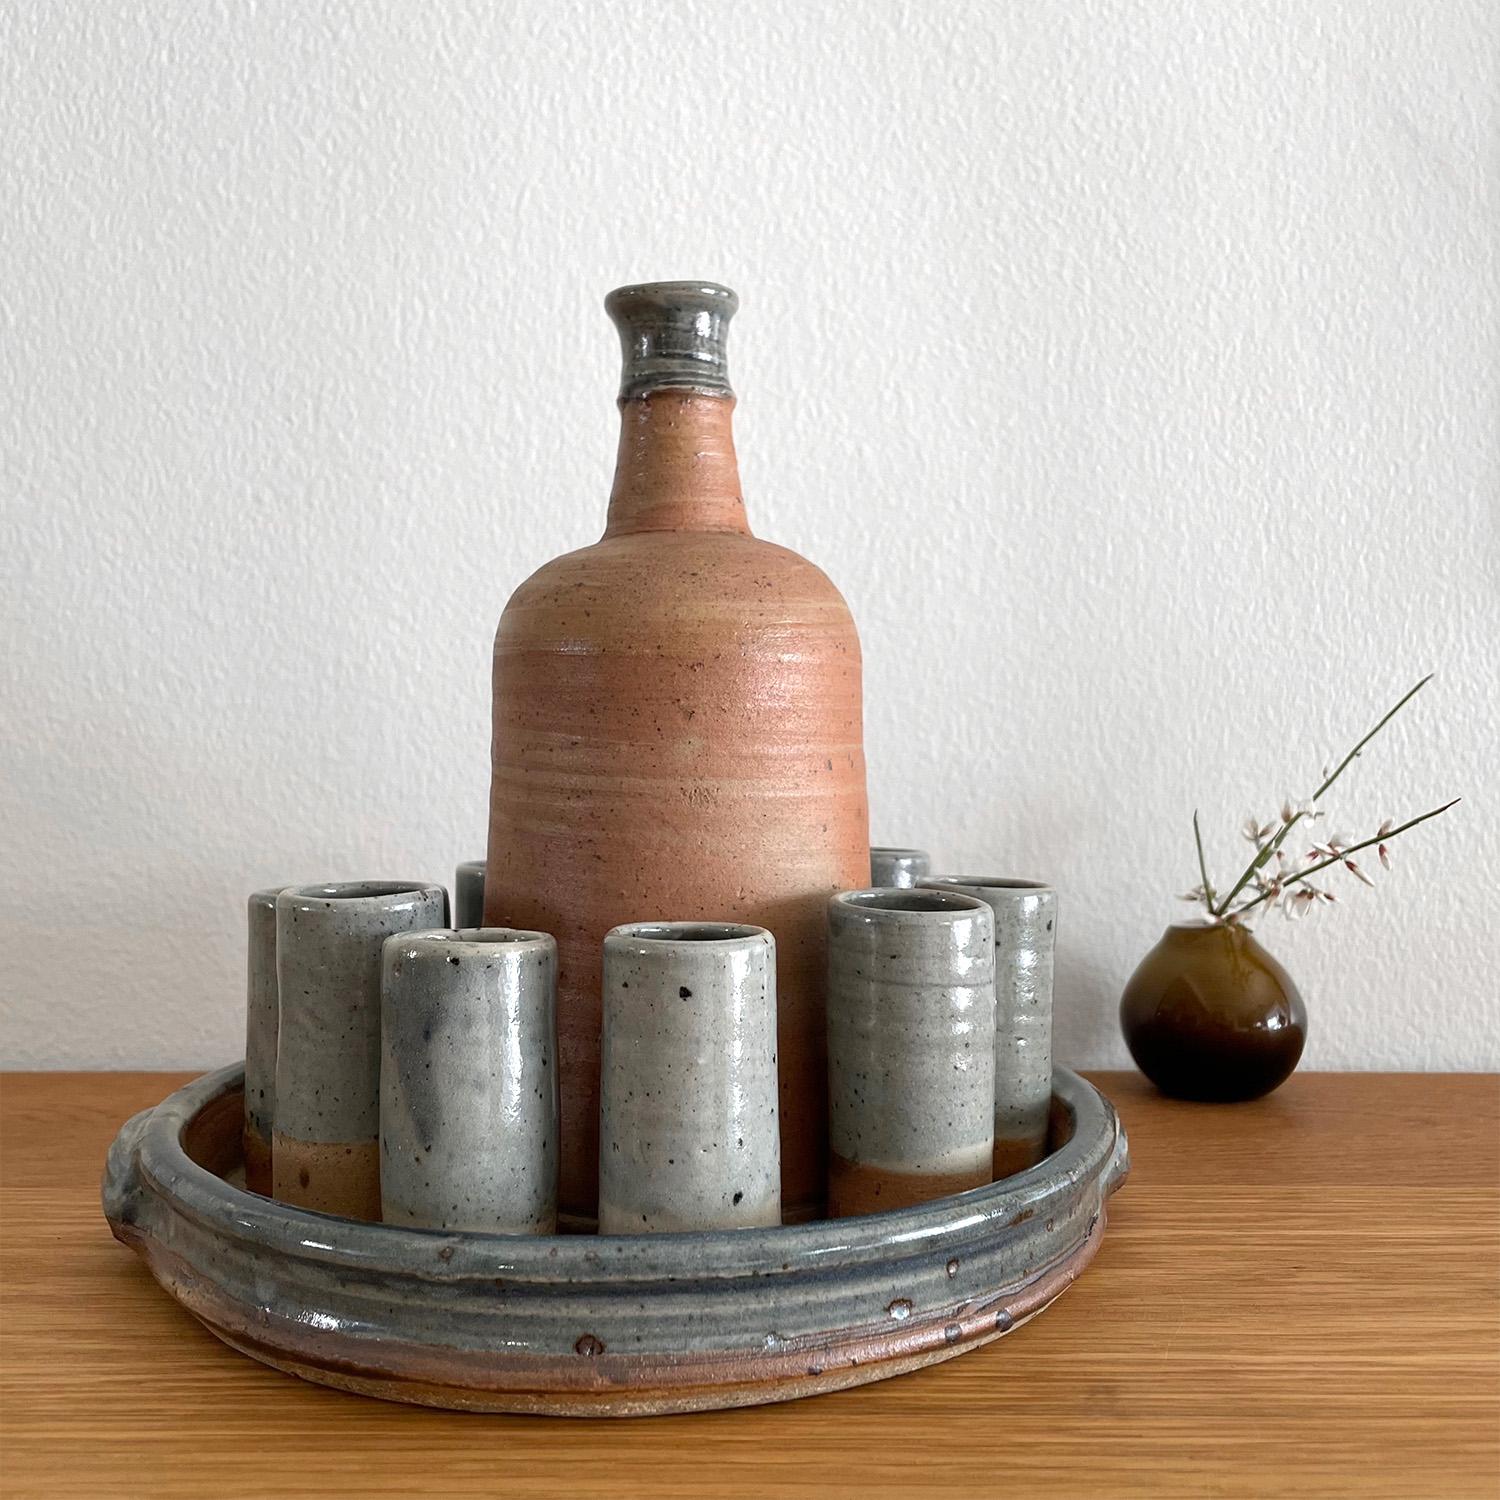 Pierre Digan stoneware service set
France, circa 1970’s
This handmade set has a wonderful organic composition and feel
Two toned french blue glazed ceramic perfectly accents the rich brown stoneware
Patina from age and use
Twelve piece service set